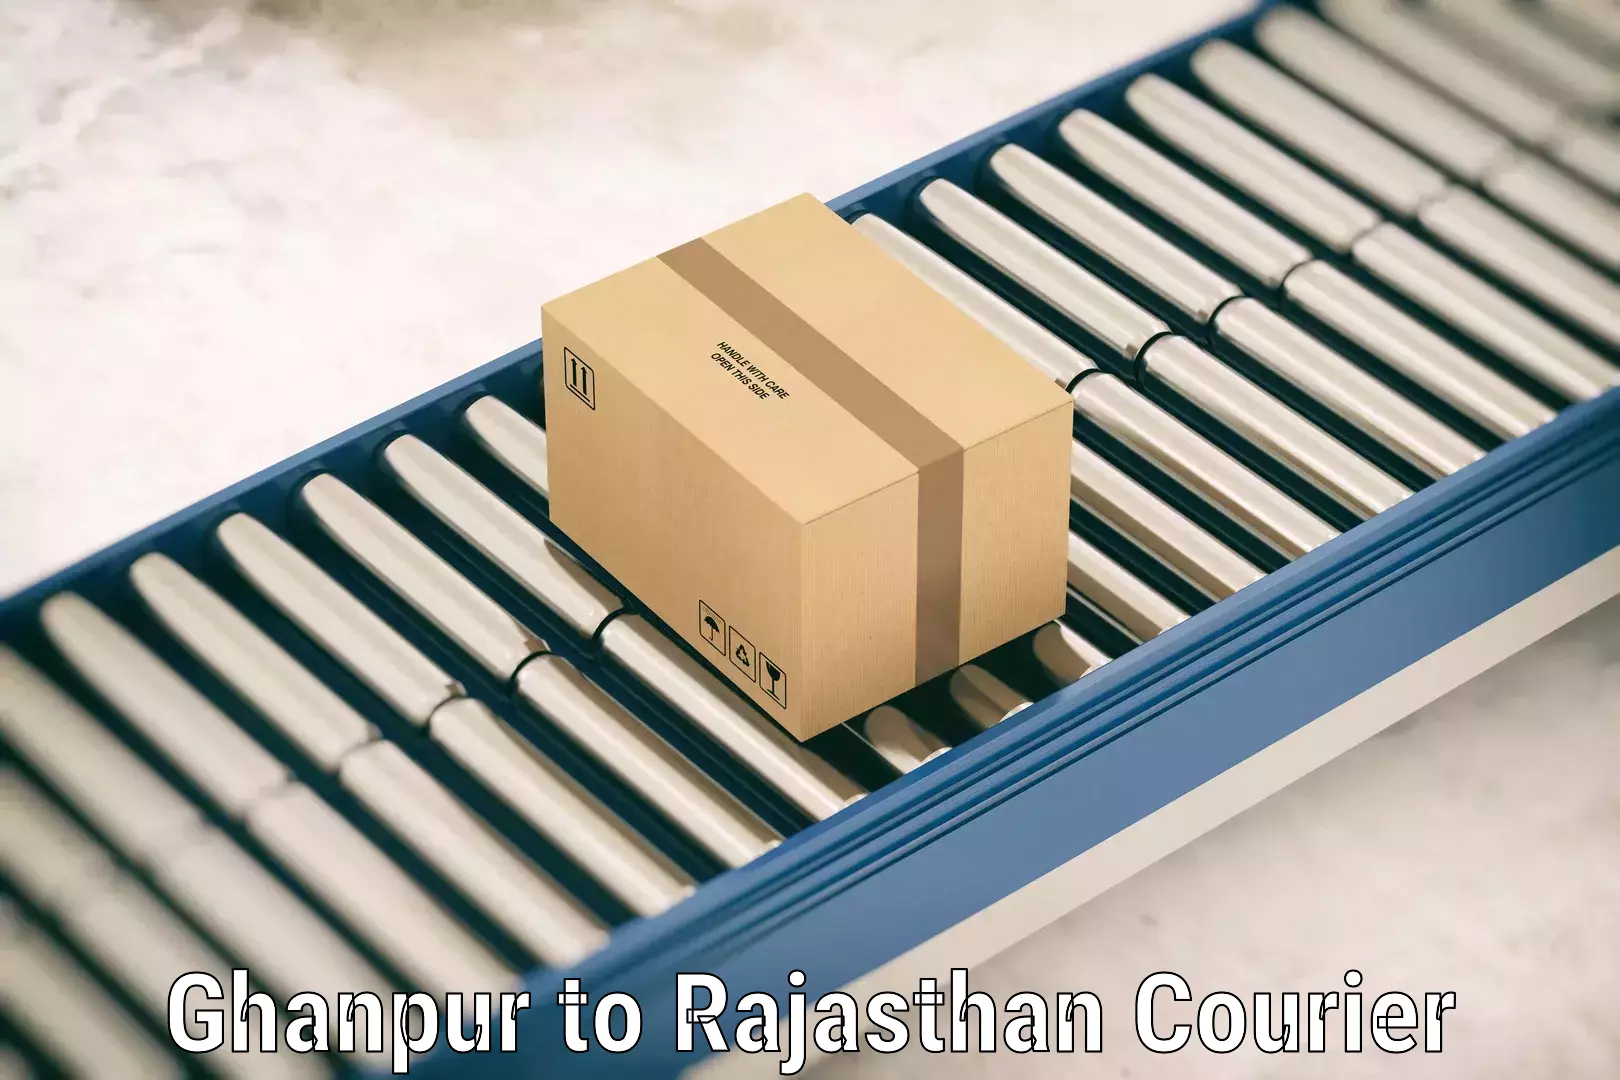 Luggage transport service Ghanpur to Rajasthan